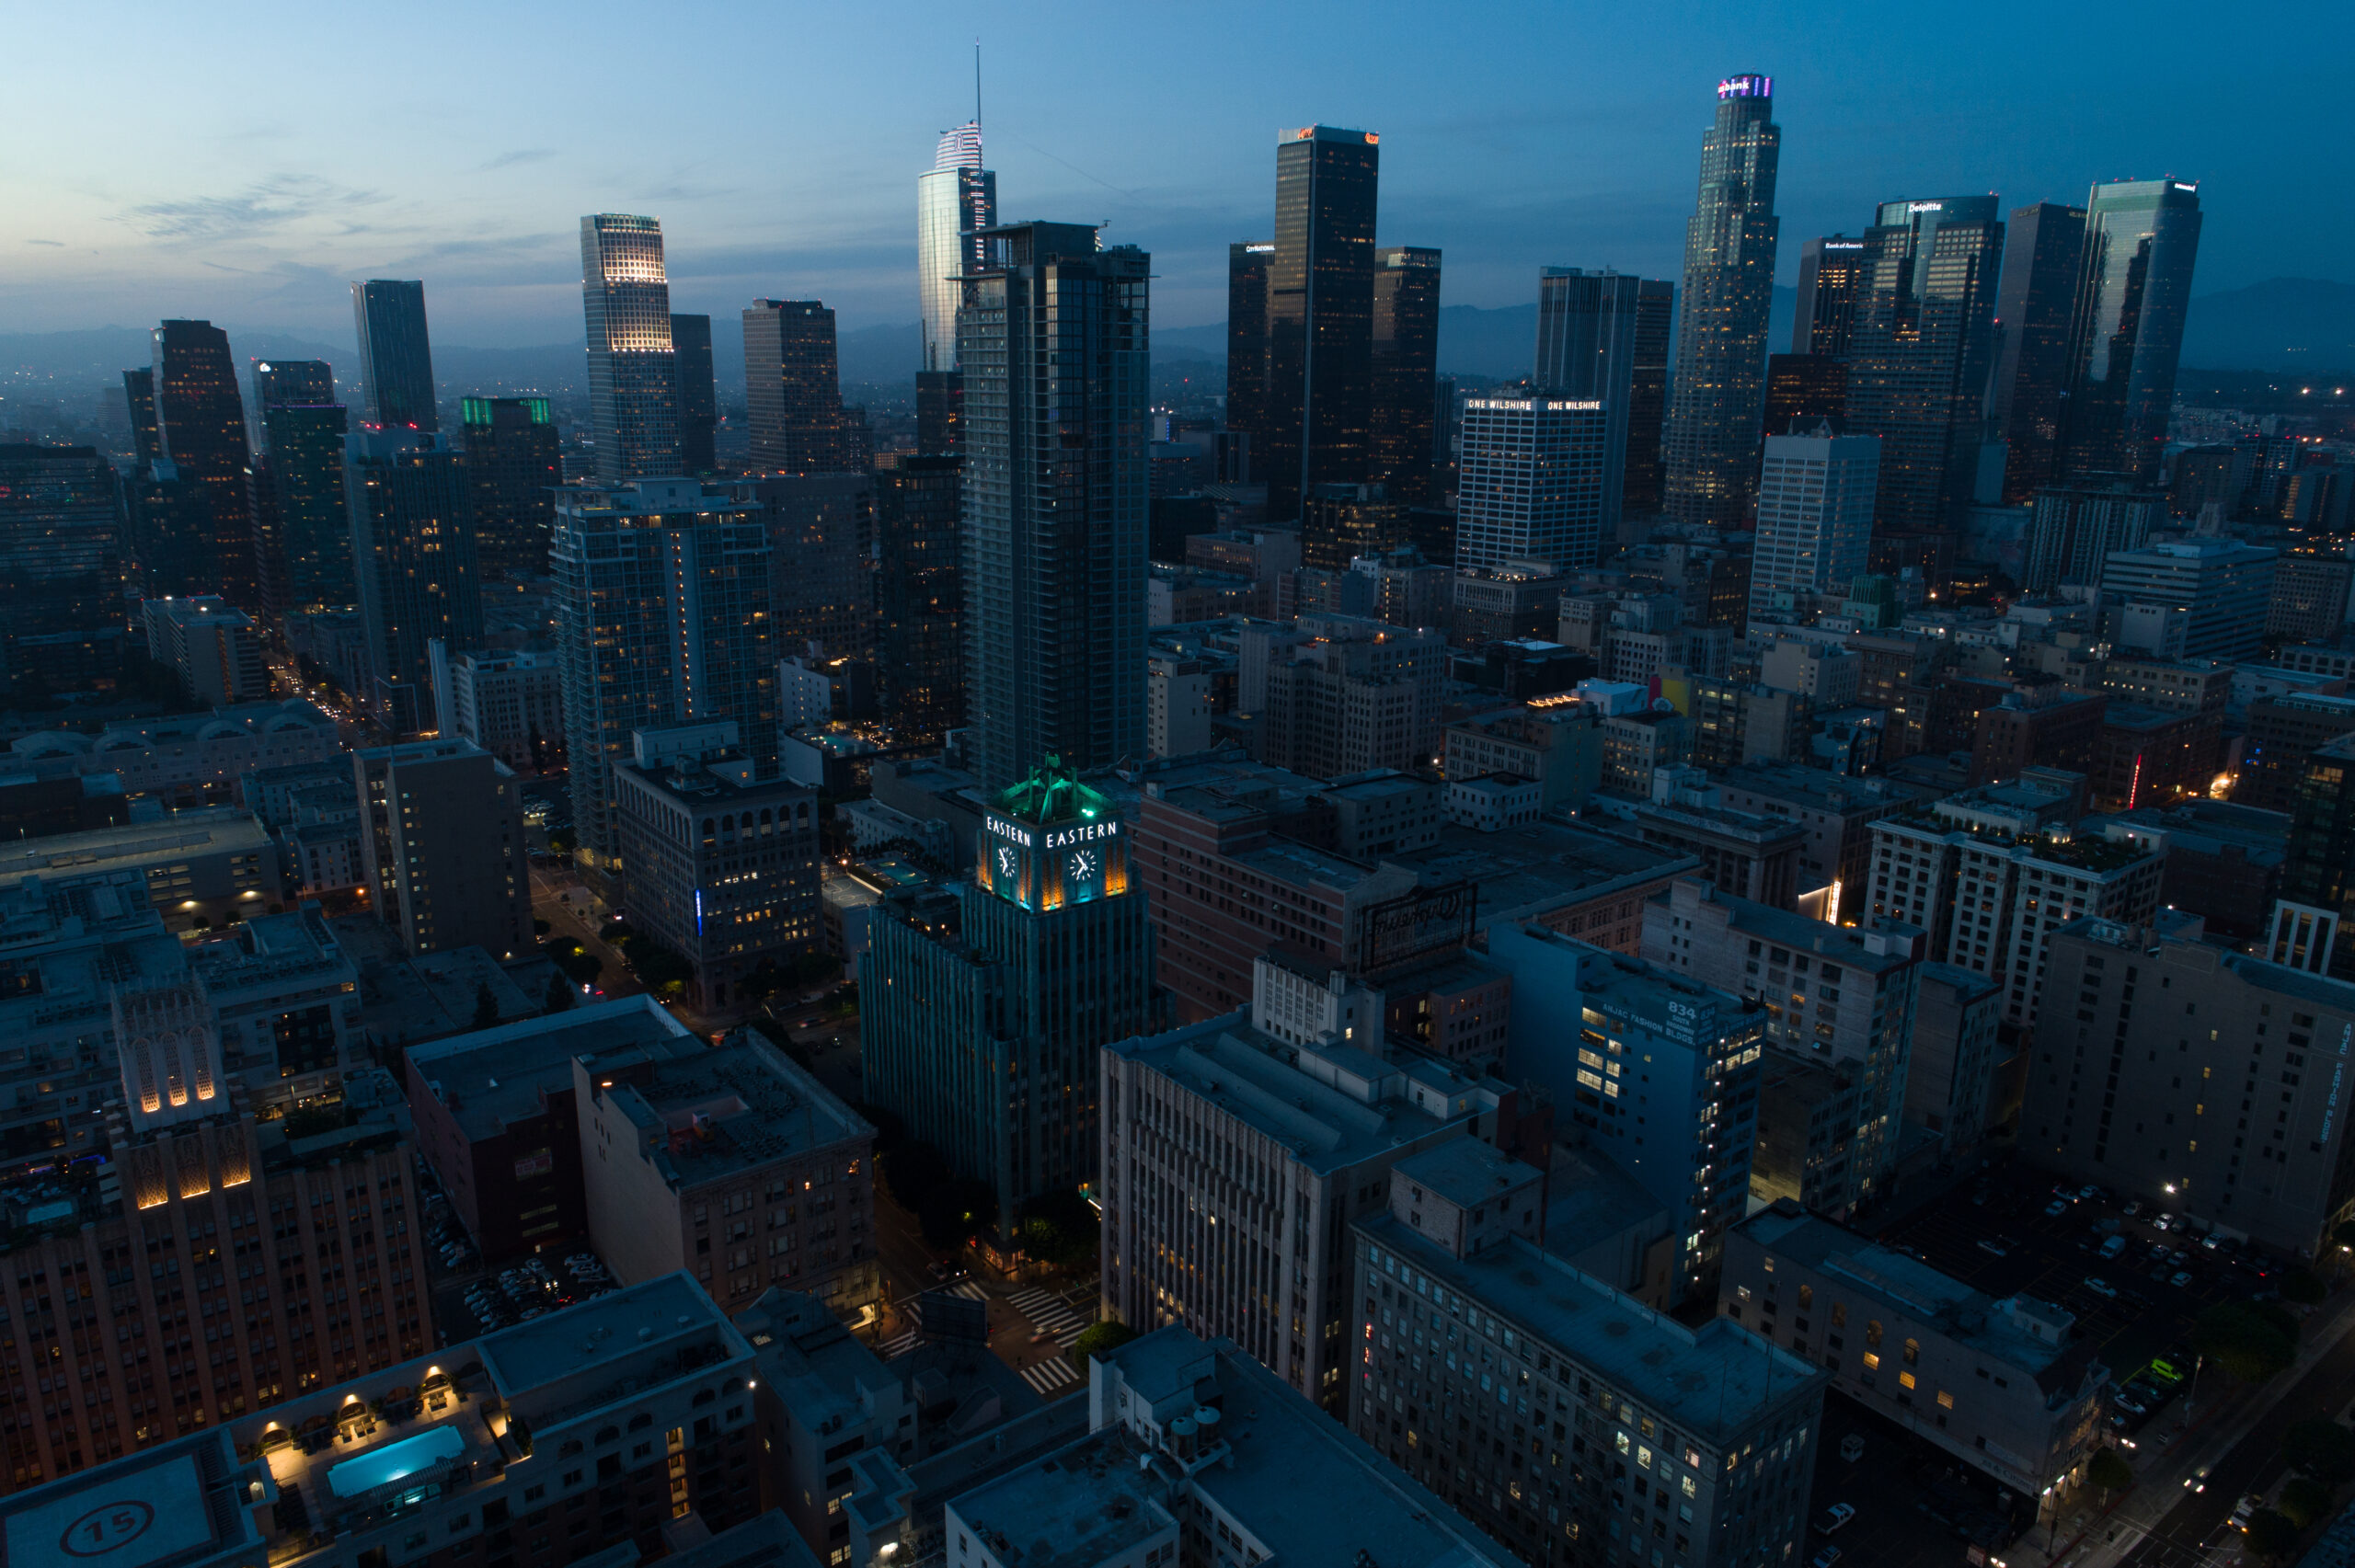 A stunning blue hour aerial shot of Downtown Los Angeles overlooking the Eastern skyline with clear blue skies.